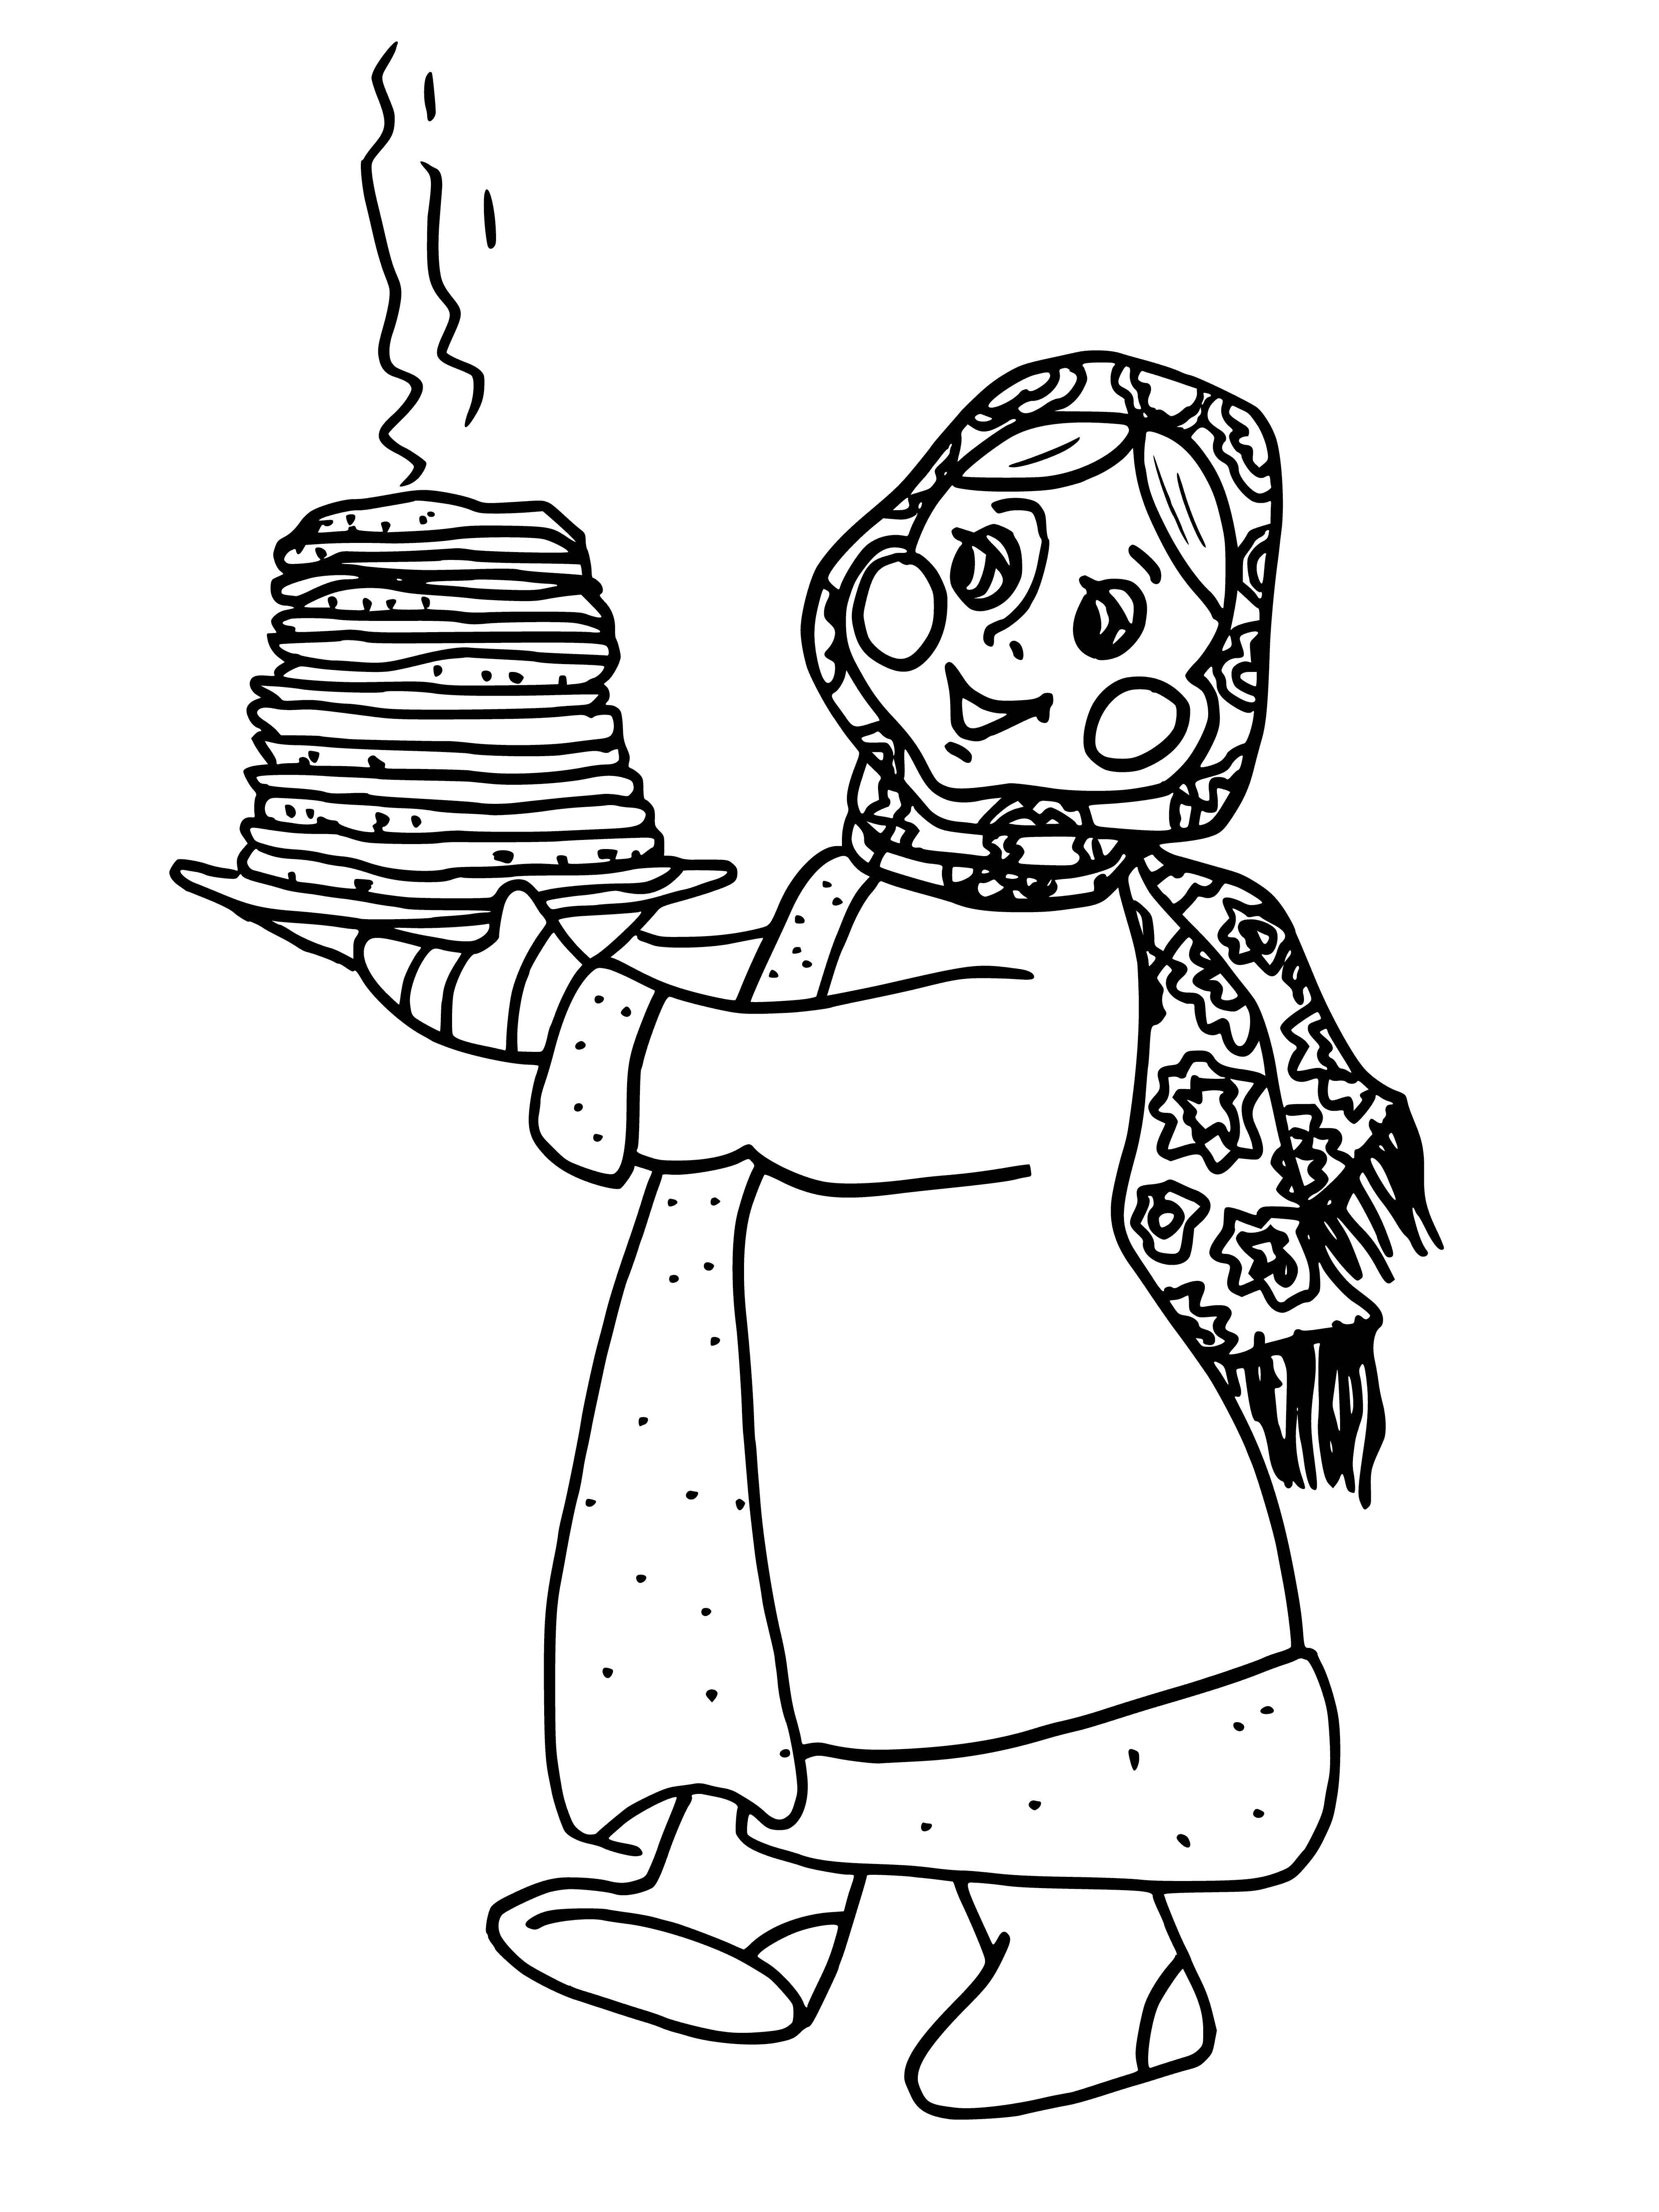 coloring page: Deliciously detailed coloring page of pancakes with mint, sugar, & syrup. Yum! #breakfast